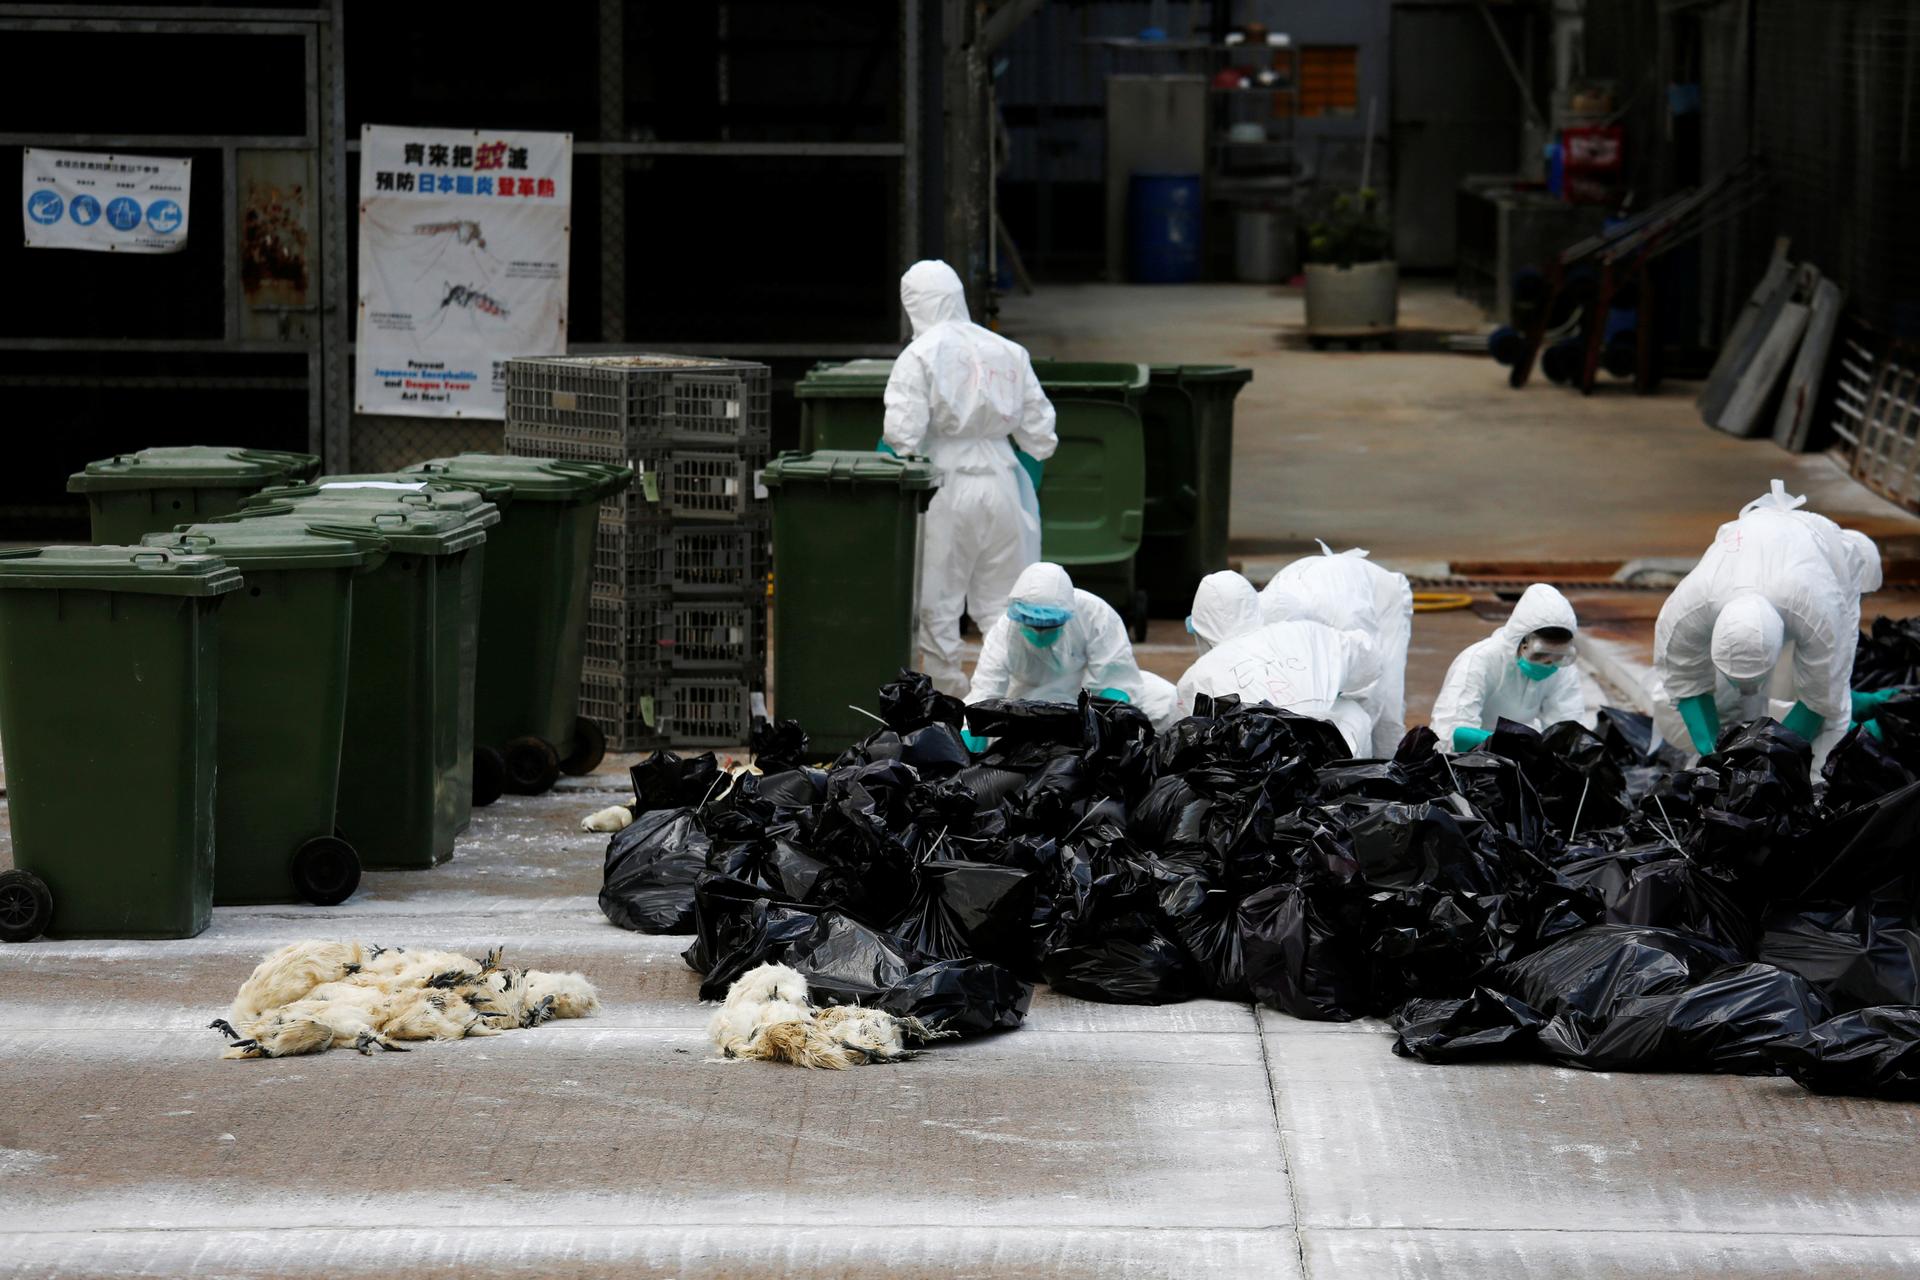 Health officers cull poultry at a wholesale market, as trade in live poultry suspended after a spot check at a local street market revealed the presence of H7N9 bird flu virus, in Hong Kong June 7, 2016.